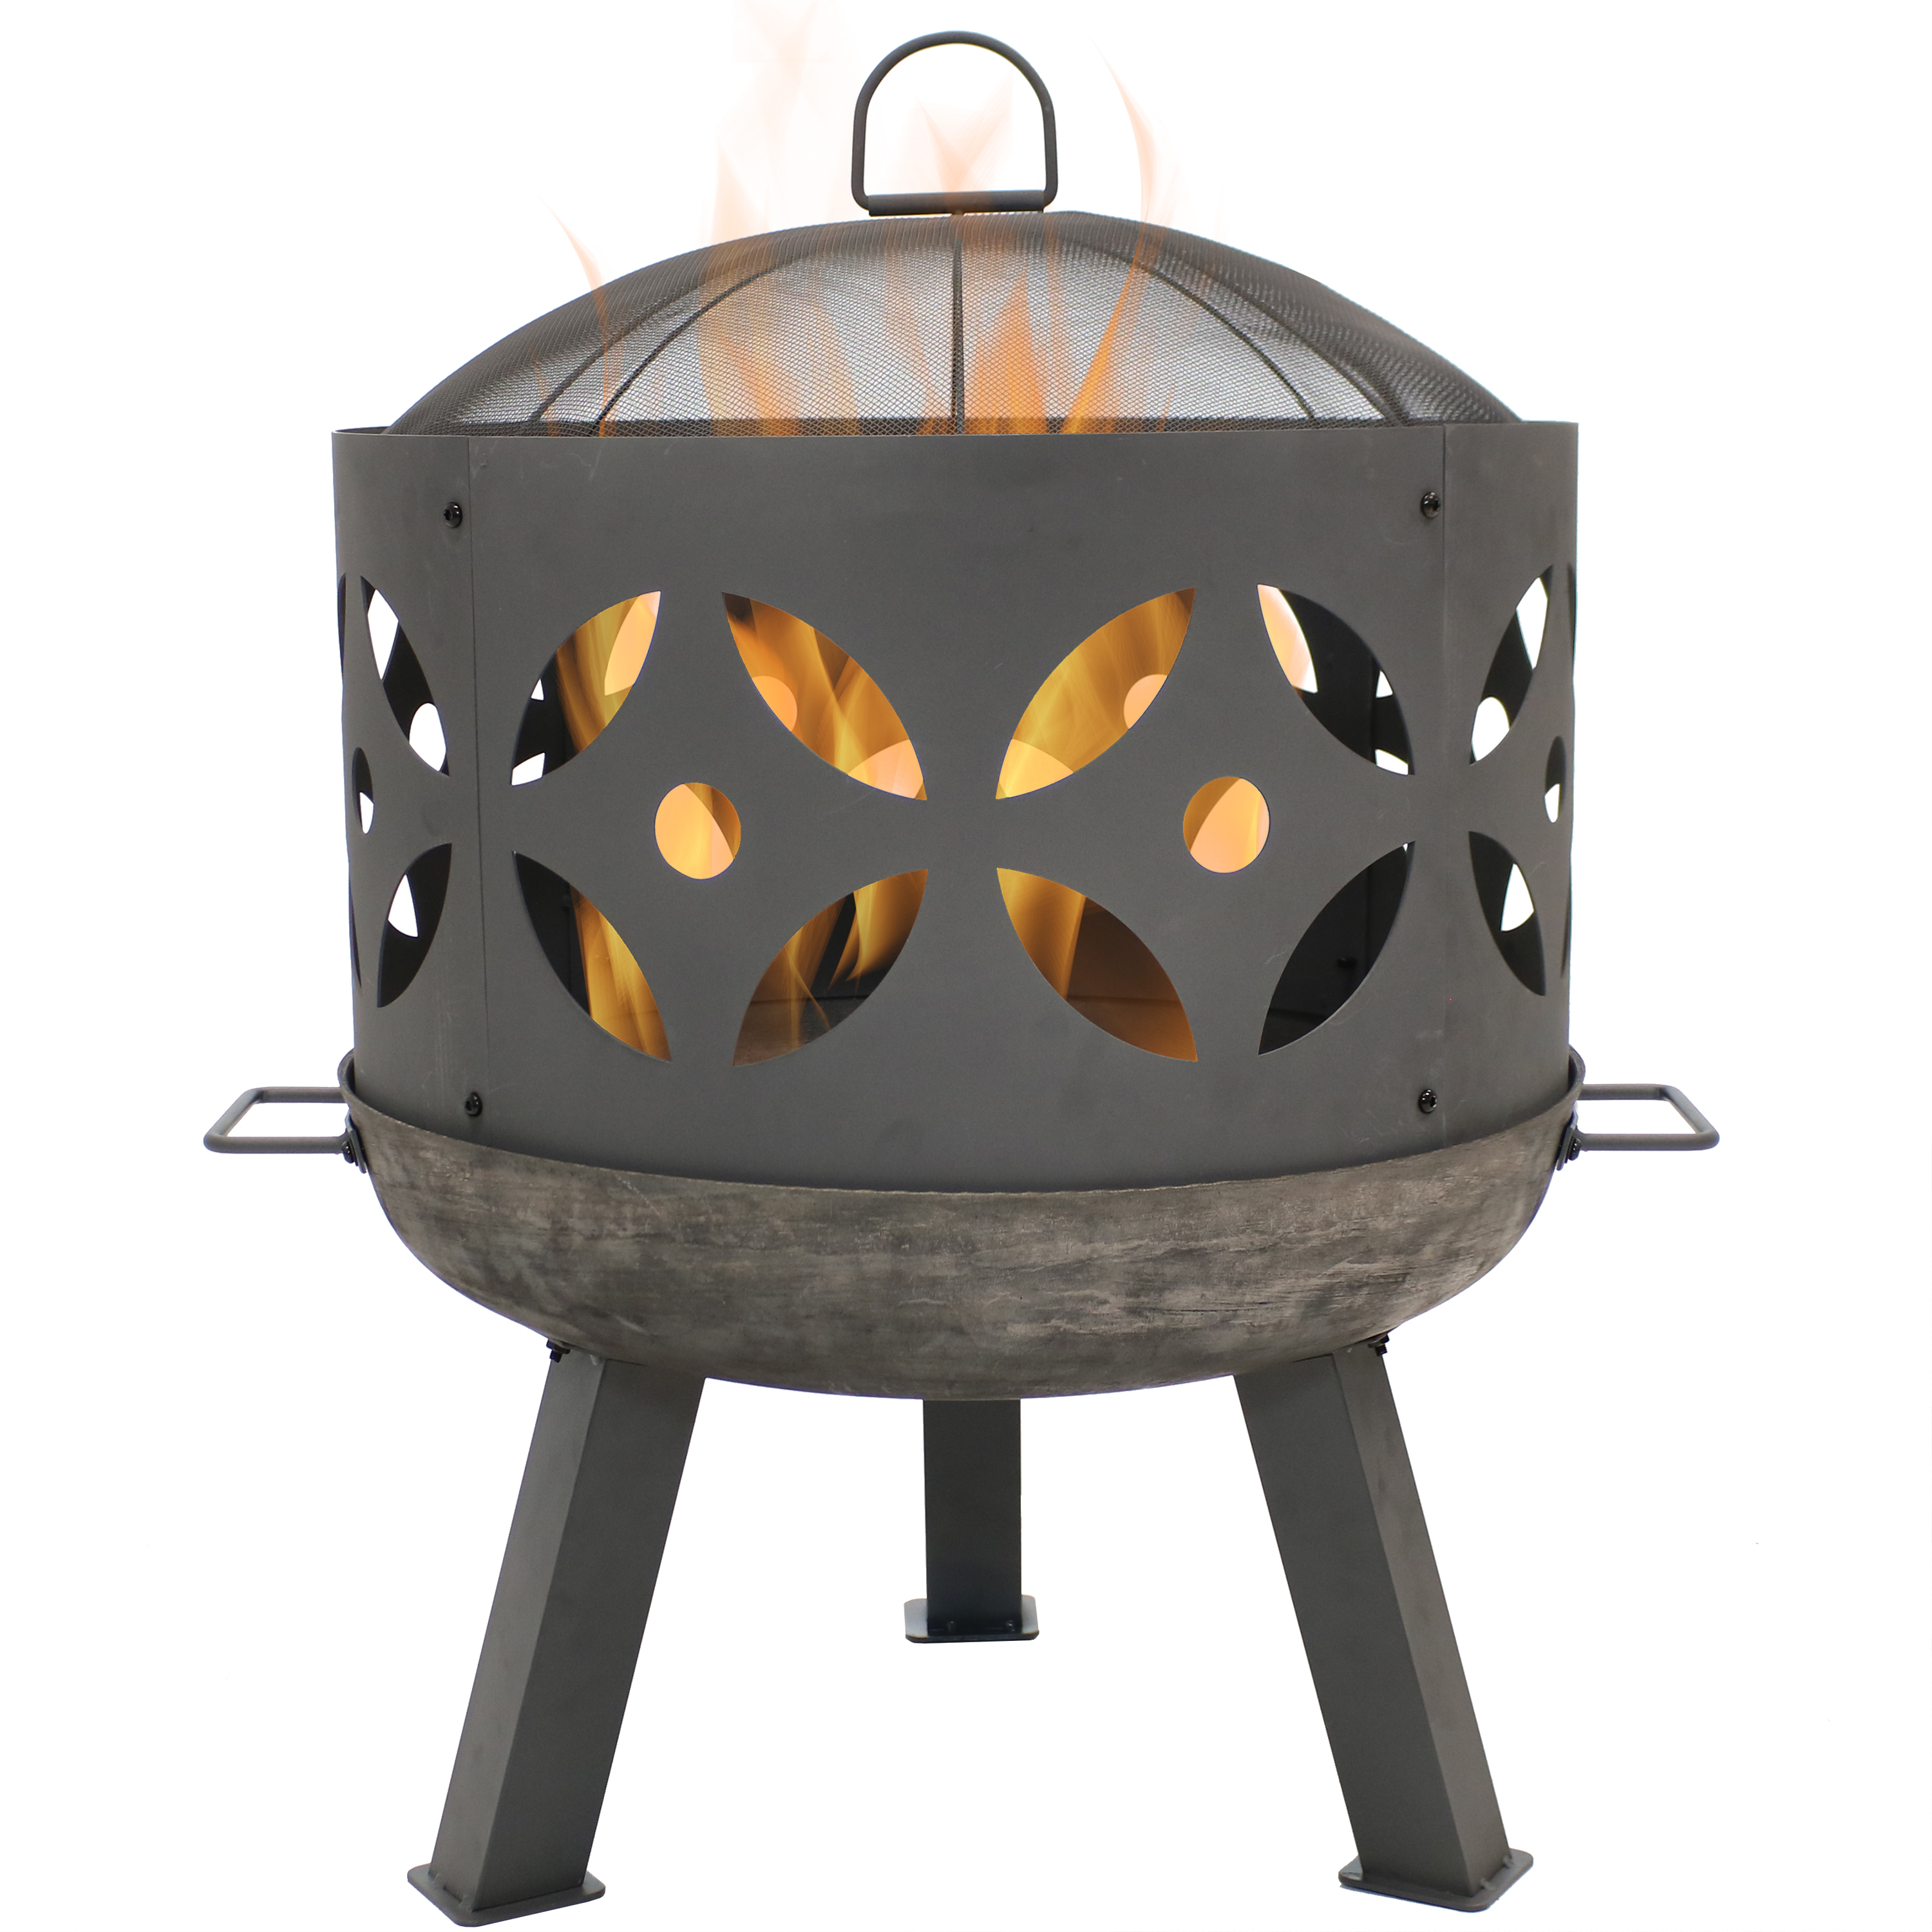 Sunnydaze Retro Cast Iron Fire Pit with Spark Screen - 26-Inch